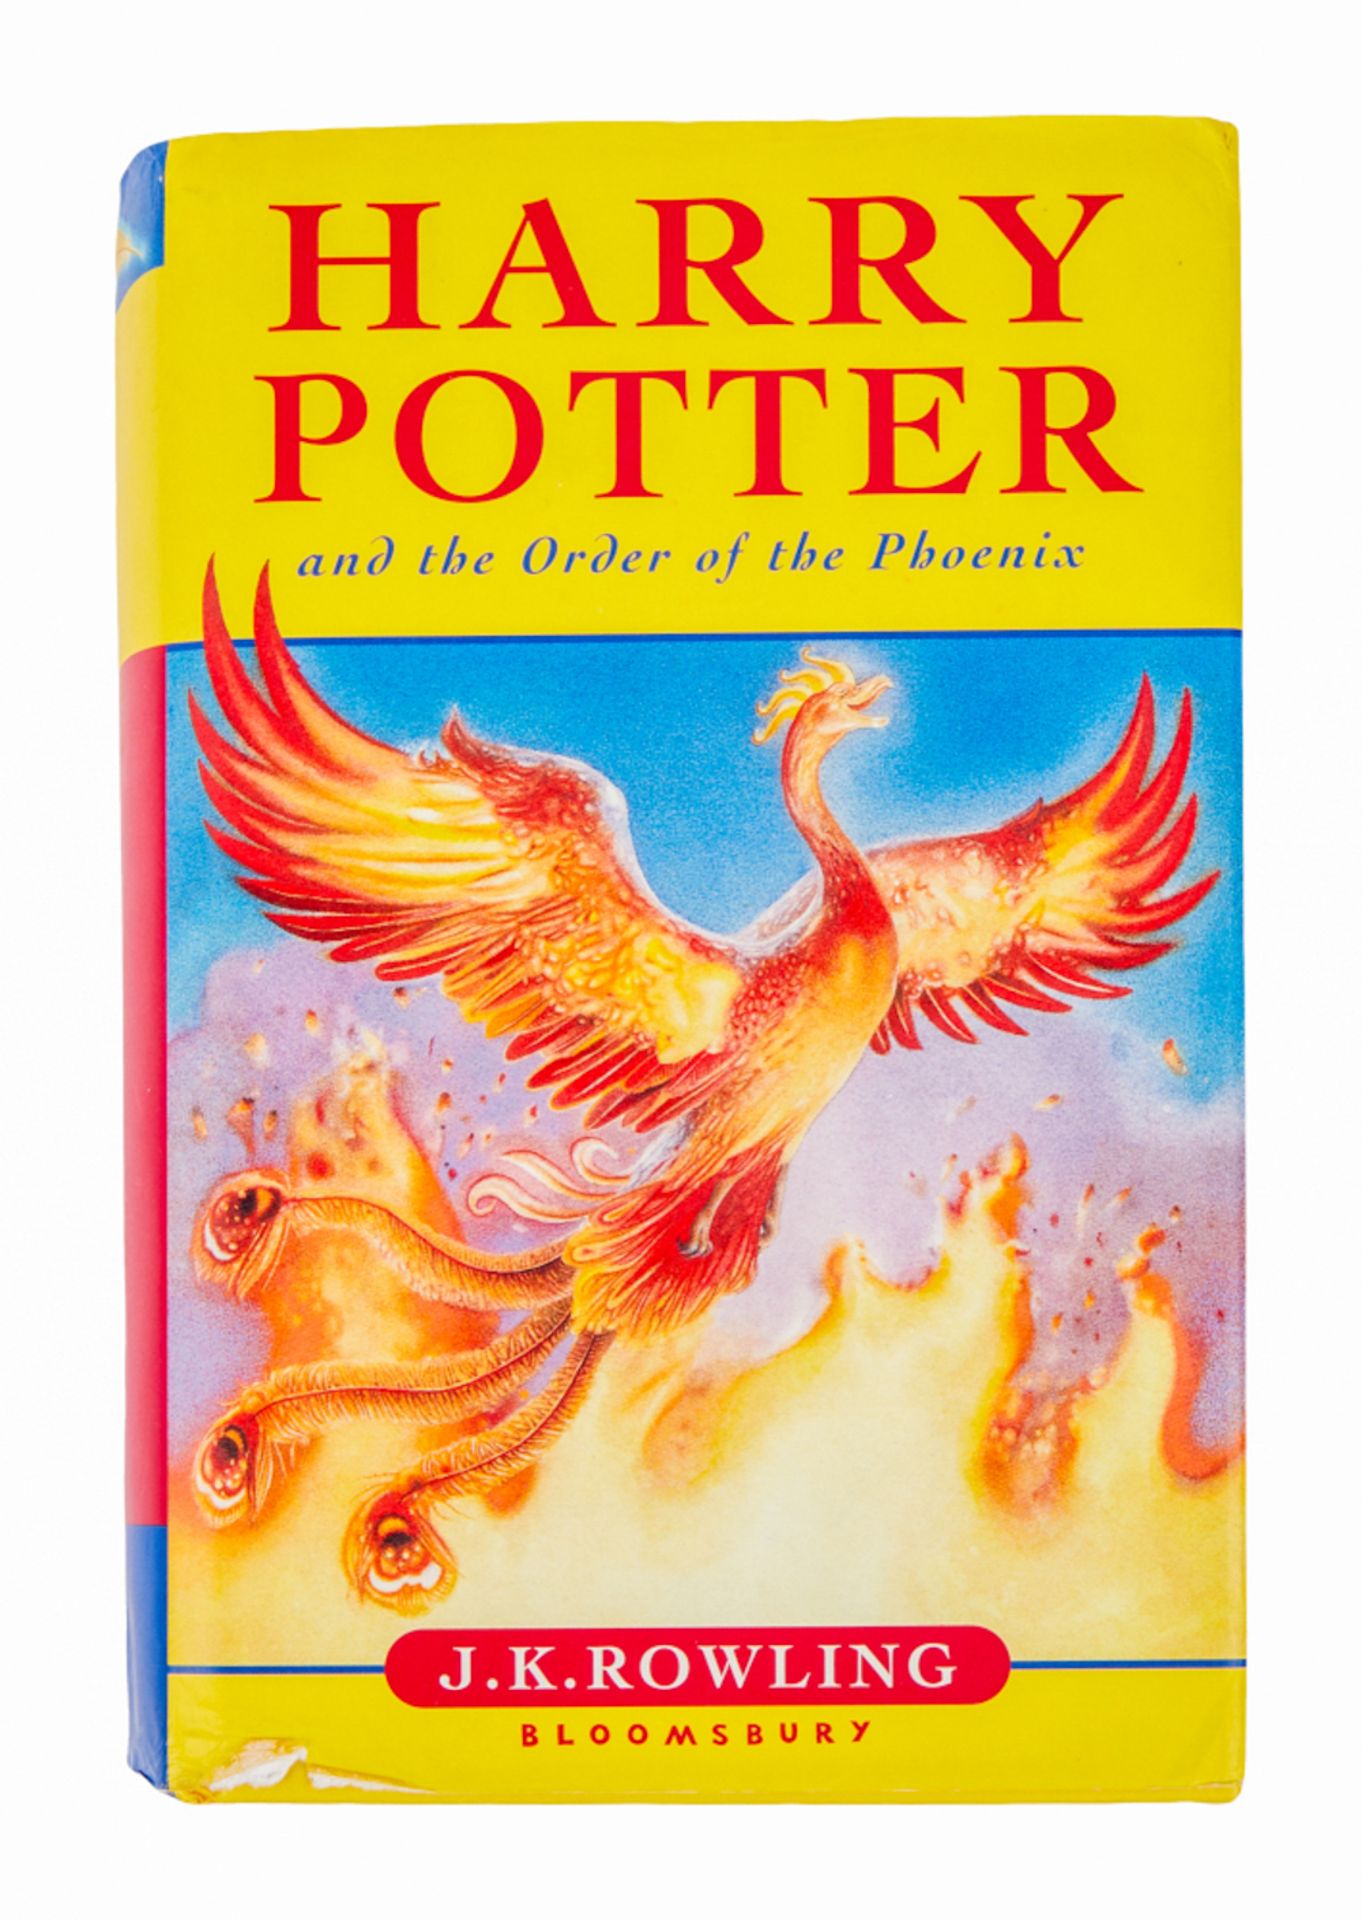 HARRY POTTER AND THE ORDER OF THE PHOENIX | J.K. ROWLING SIGNED FIRST-EDITION BOOK - Image 2 of 5